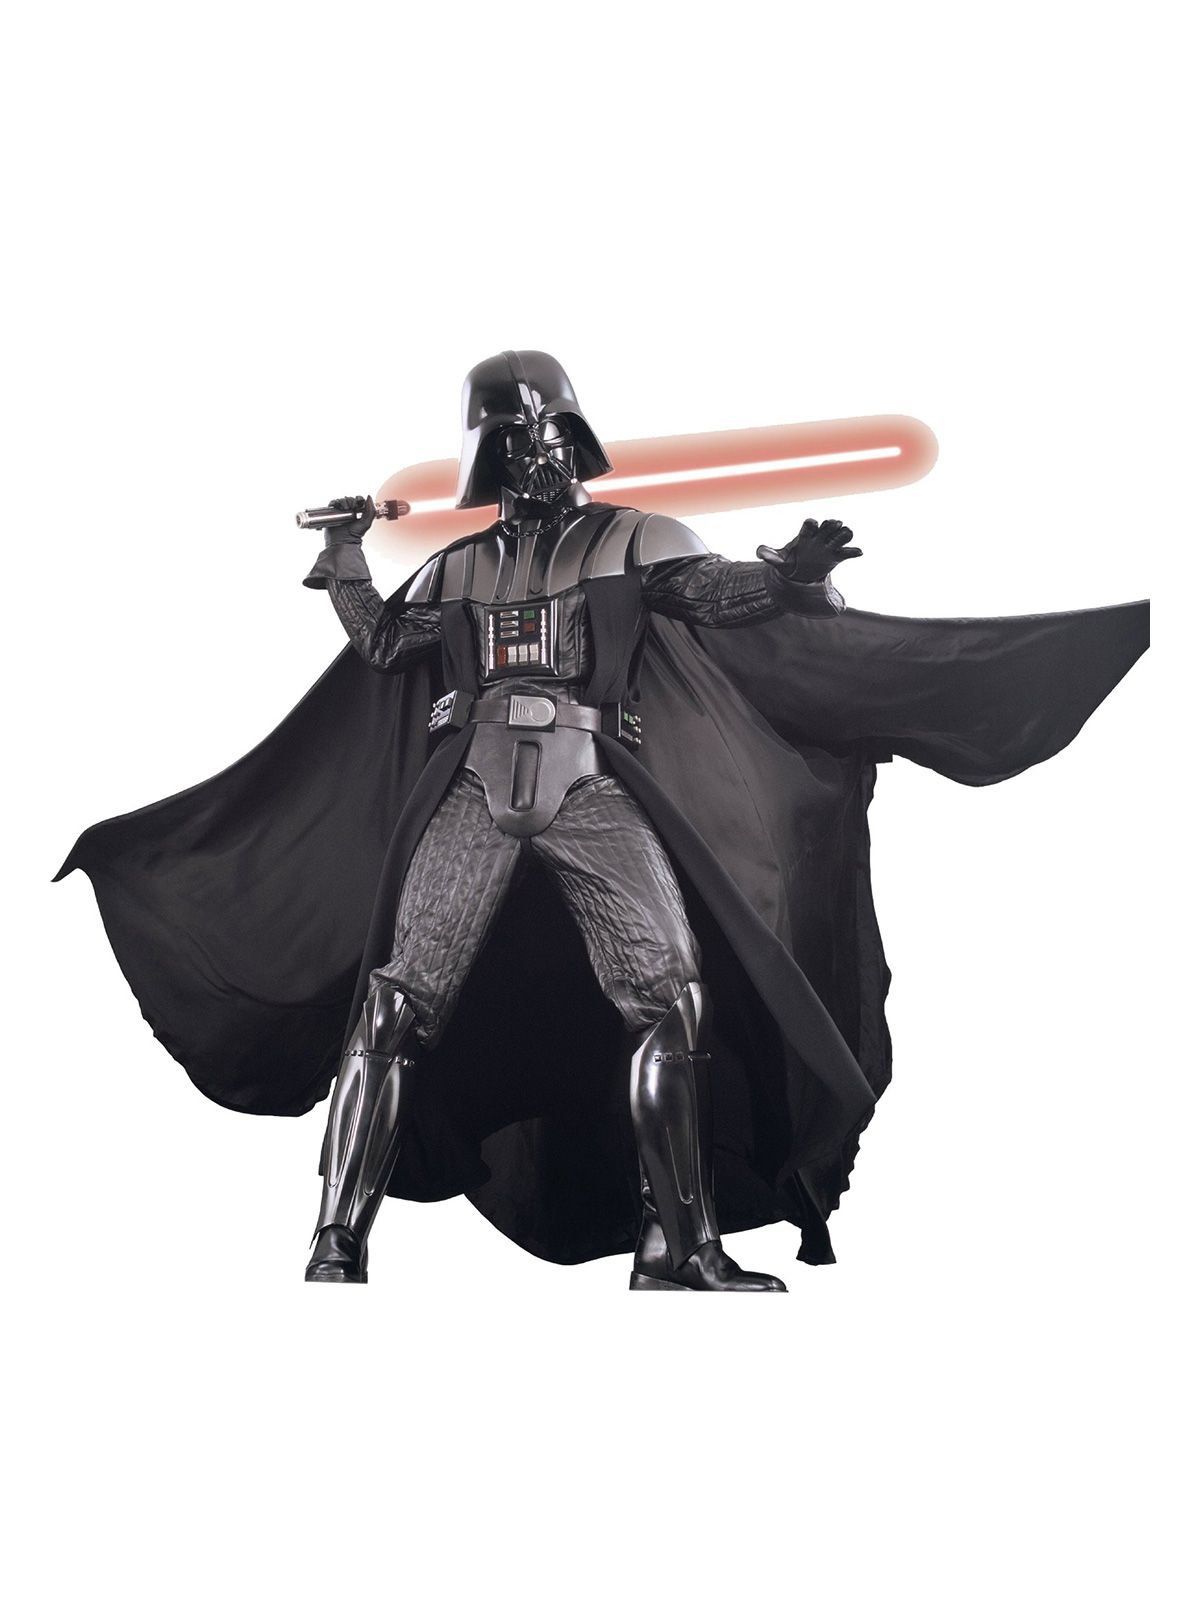 Are You Looking For The Best Star Wars Costumes For Adults Geek Hut Prlog